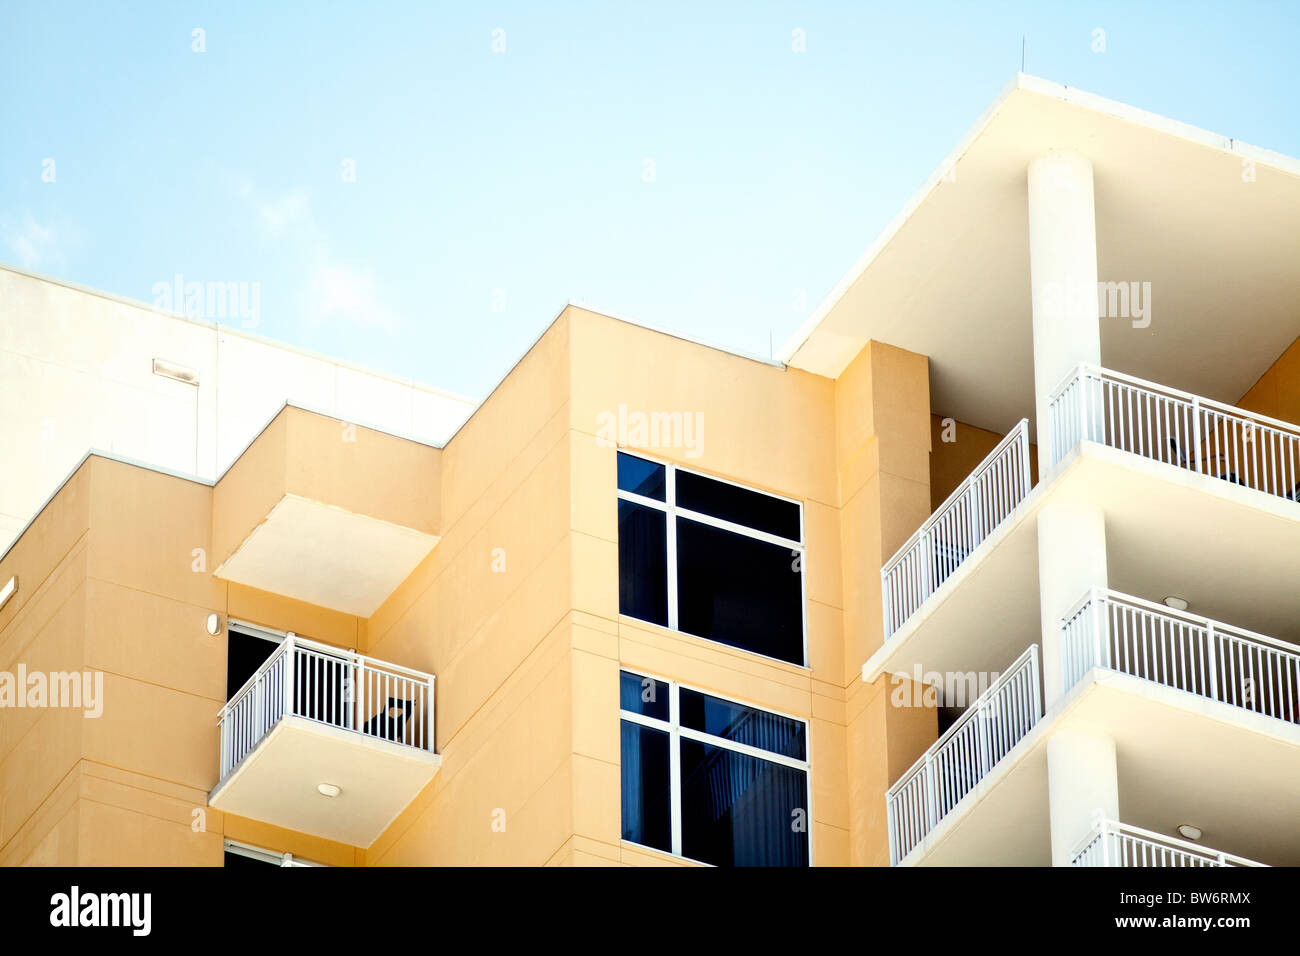 Angular shapes made by building balconies and roof line. Stock Photo